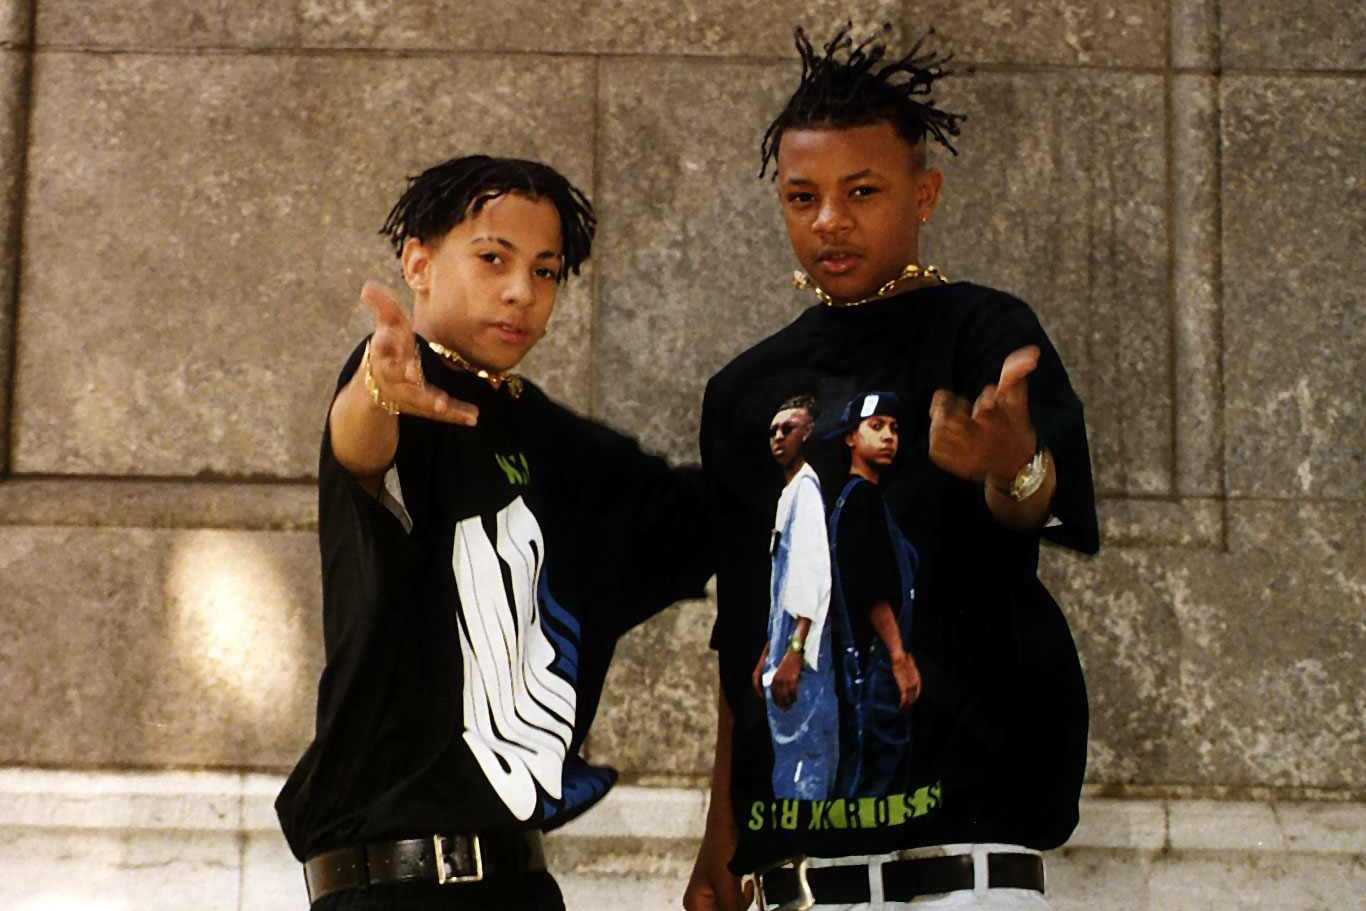 Chris Kelly of Kriss Kross dead at 34: reports - CityNews ... from toronto....